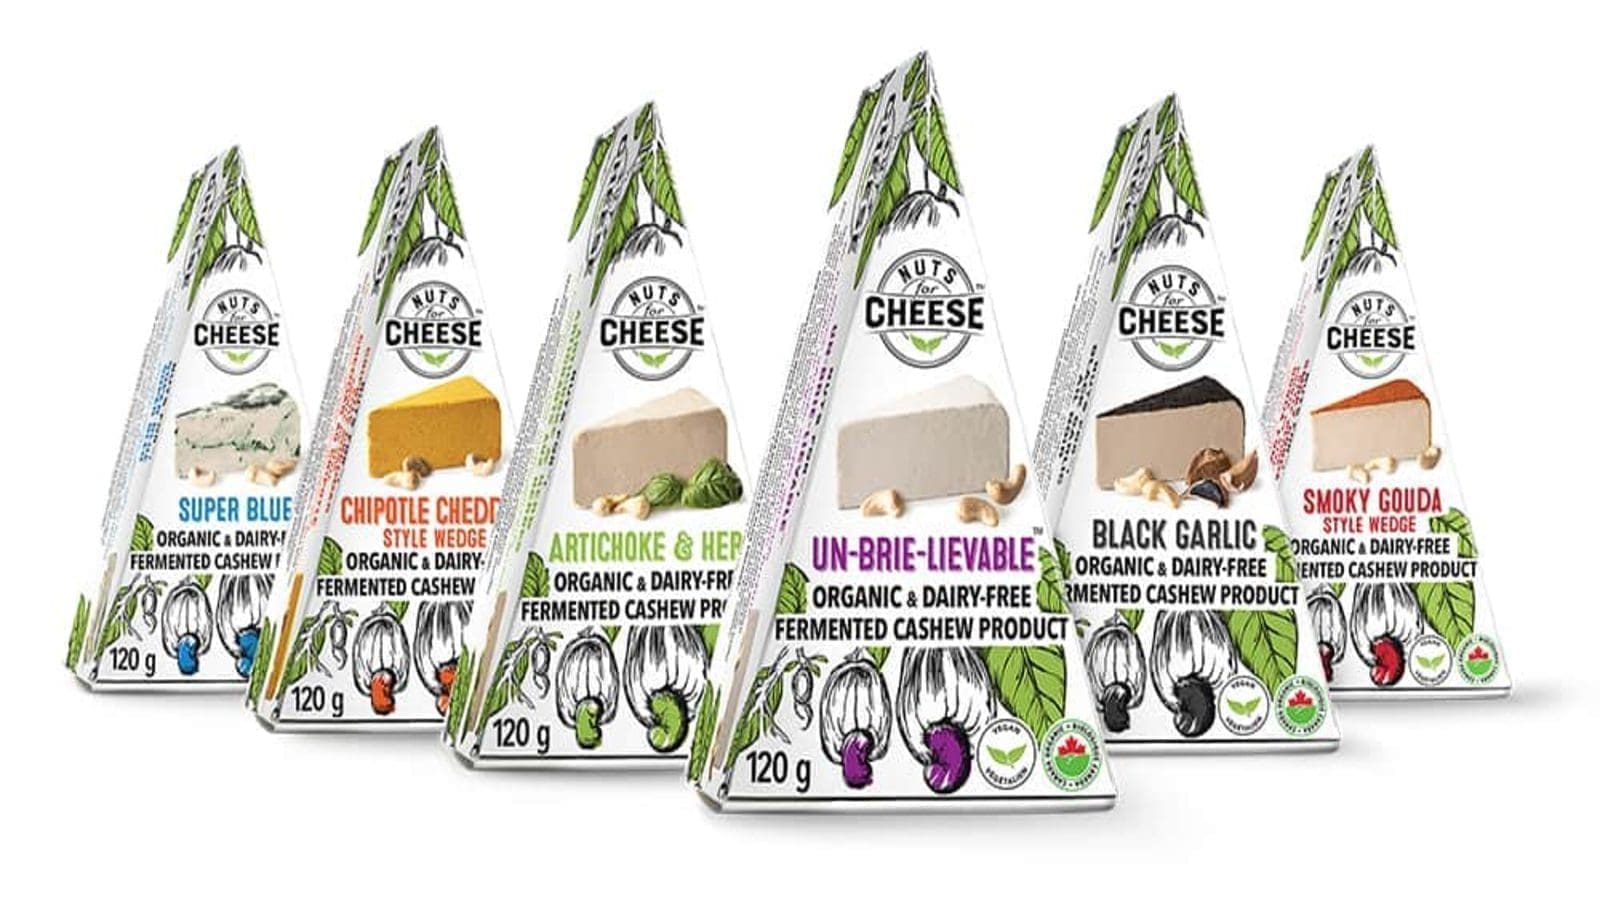 Nuts For Cheese secures US$ 4.12M to support operation enhancement